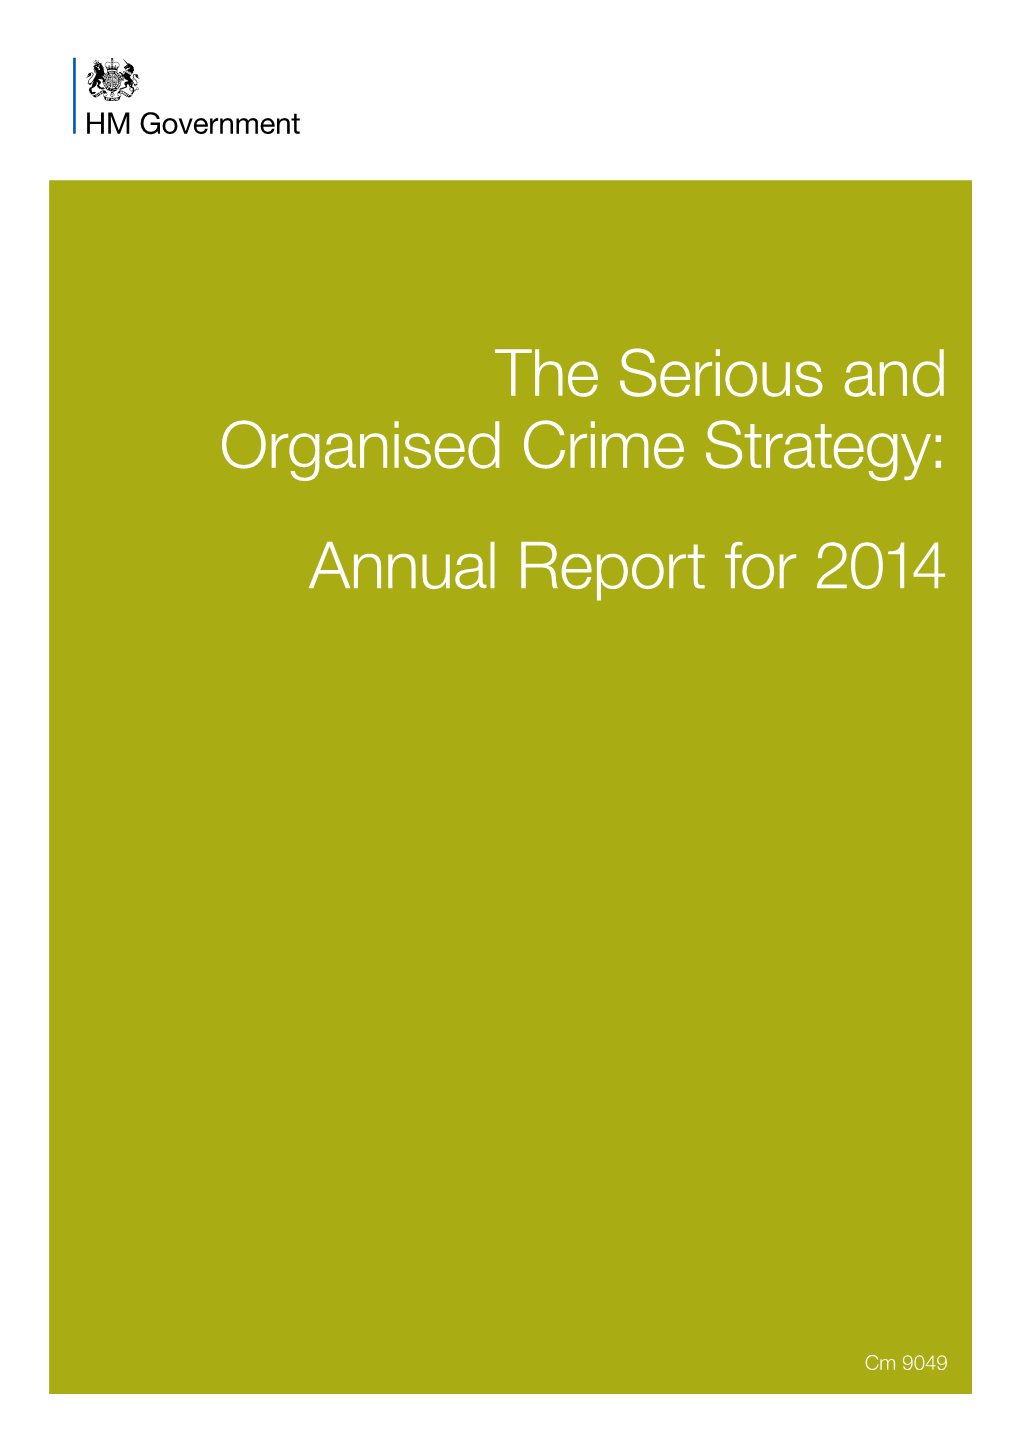 The Serious and Organised Crime Strategy: Annual Report for 2014